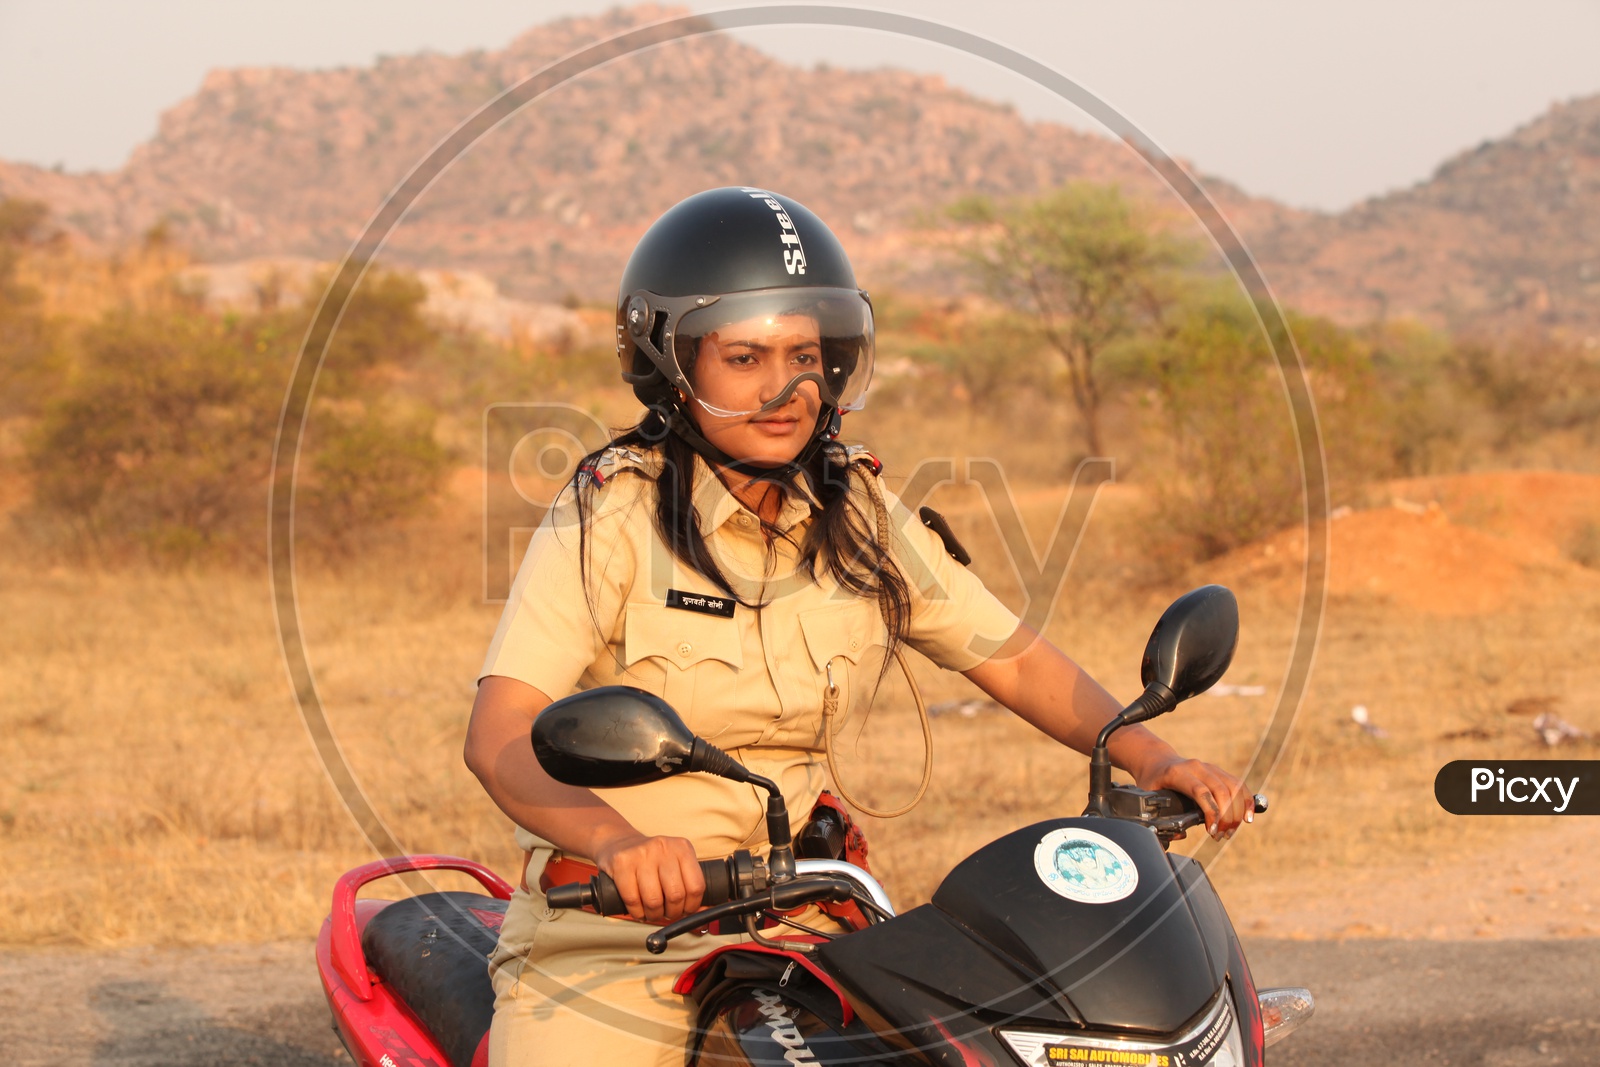 A Woman or Lady Police Riding a Bike